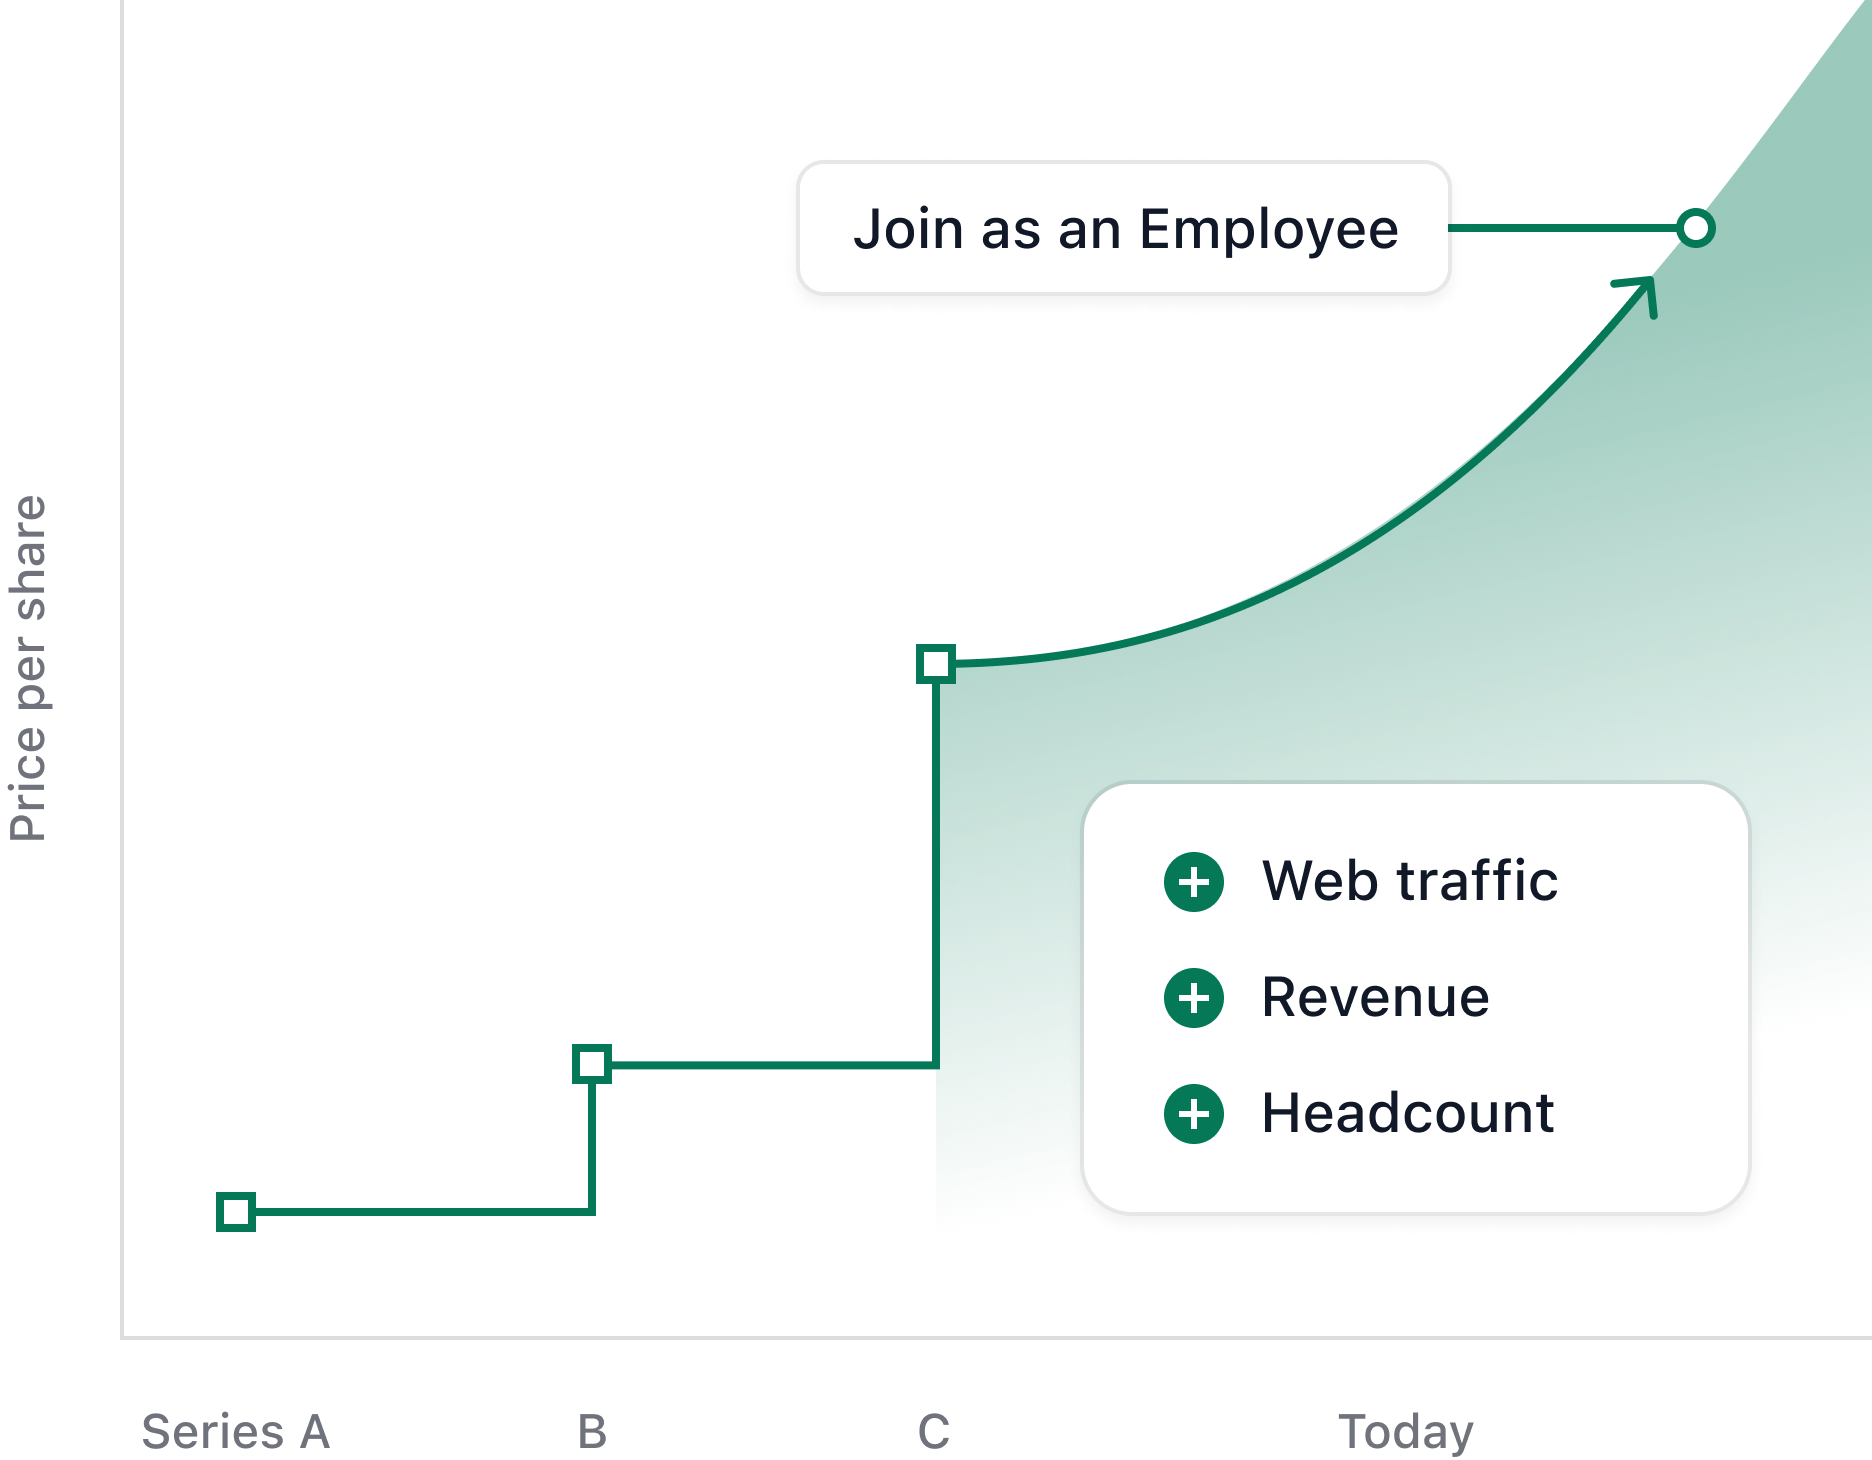 A graph showing how up-to-date data helps employees join startups at the optimal time to earn equity